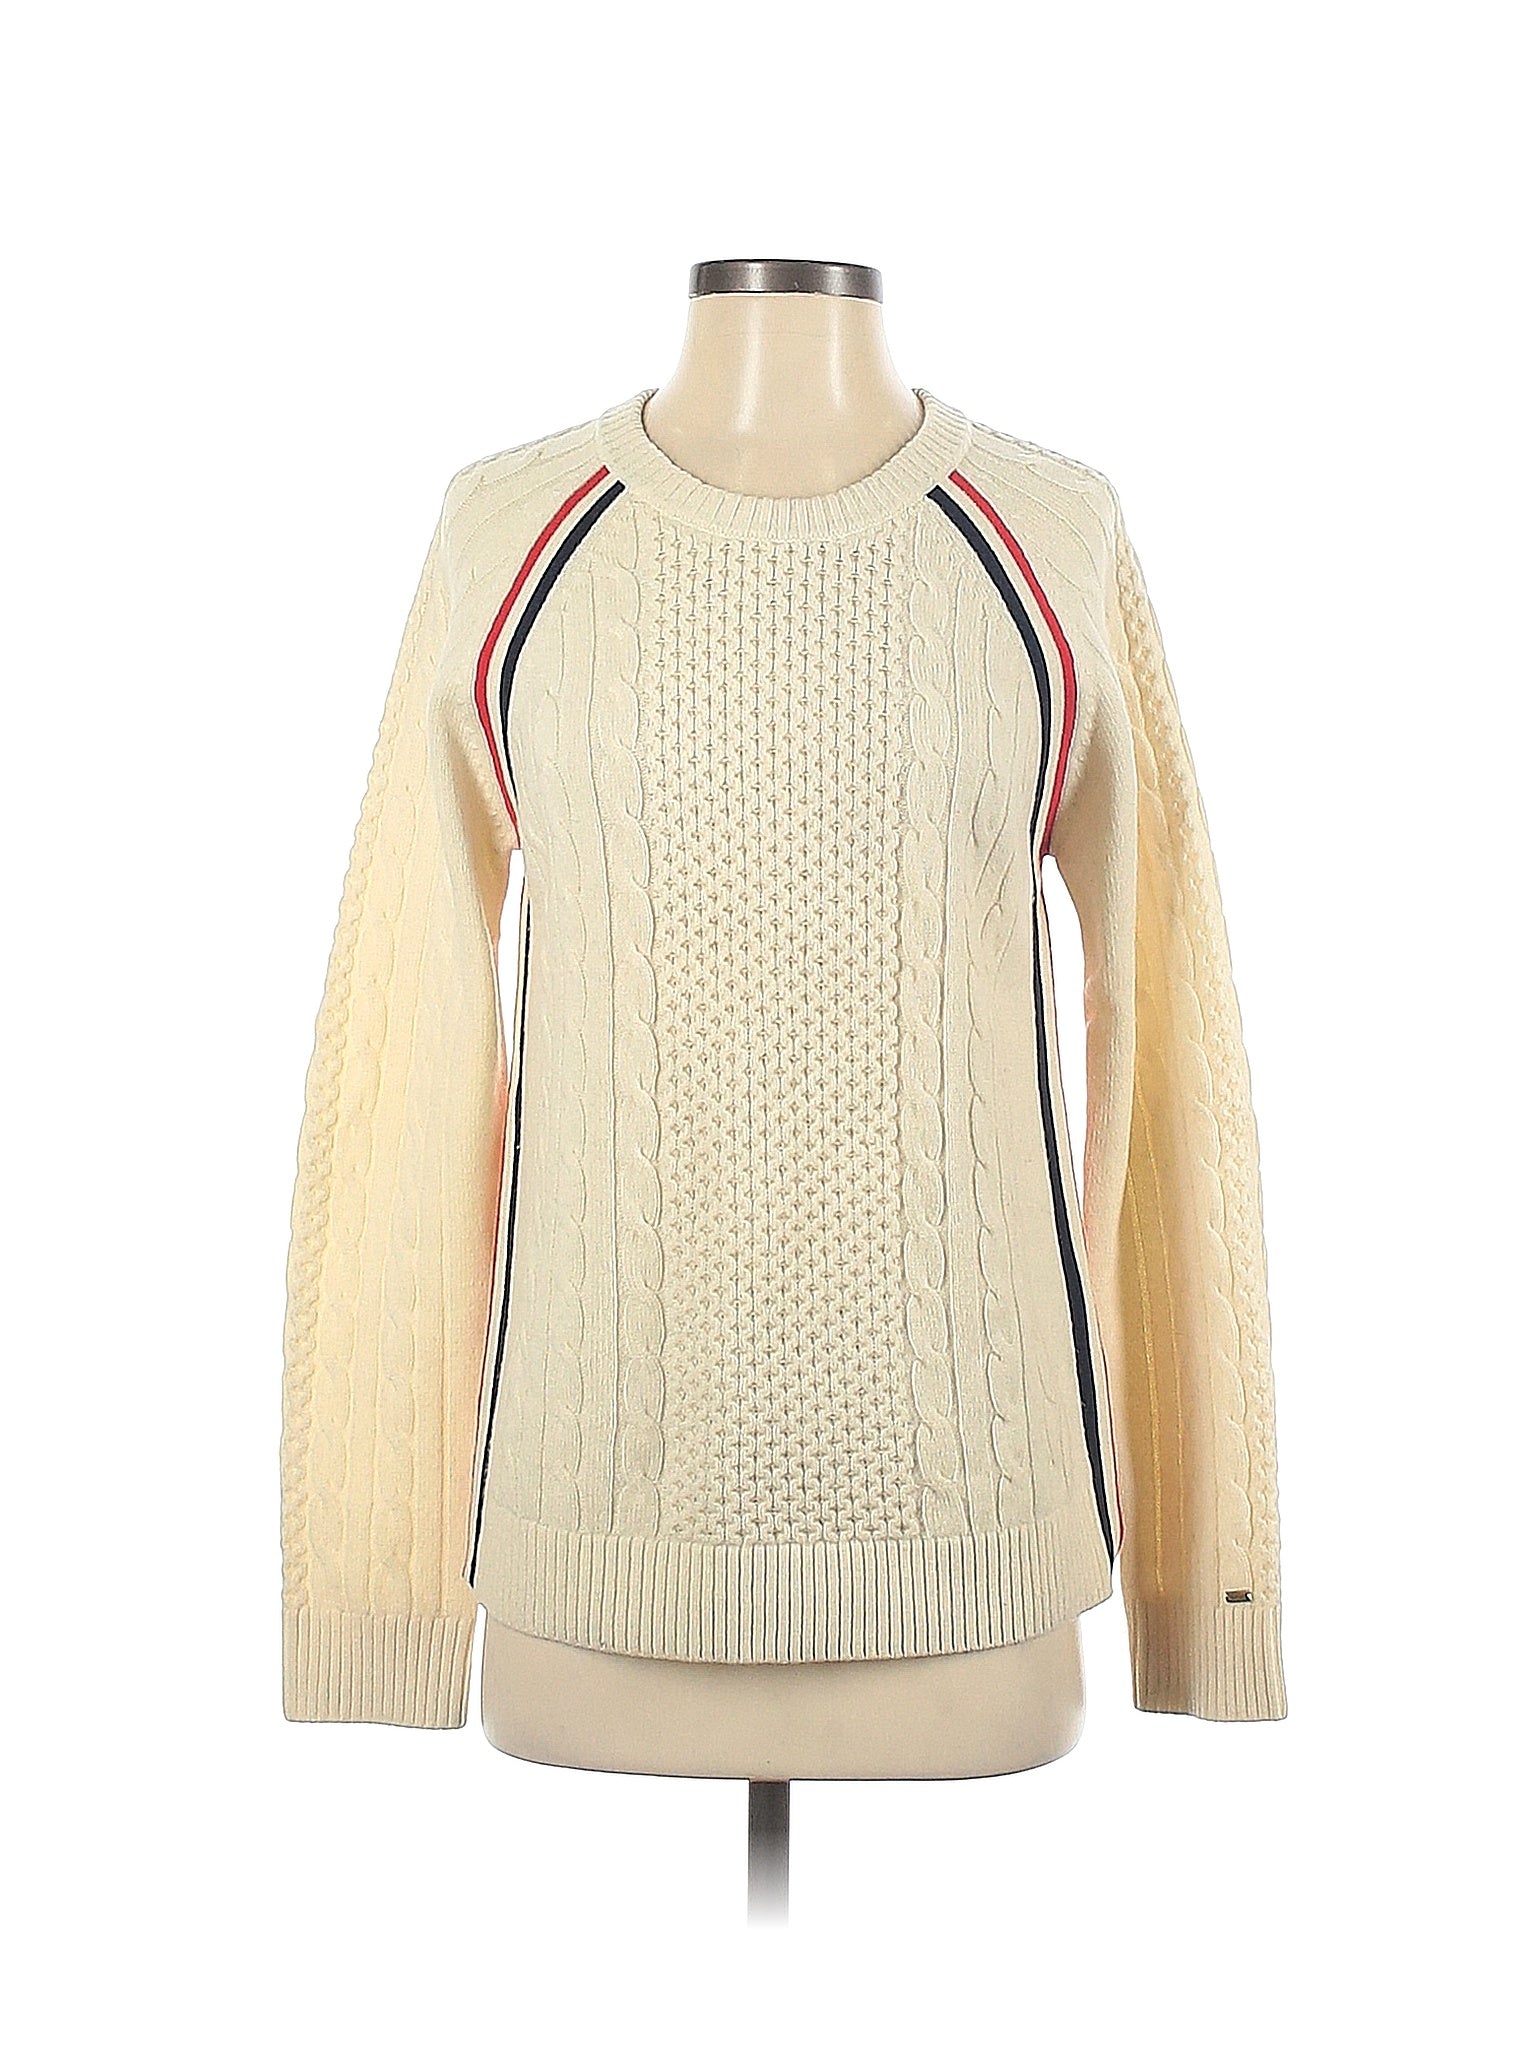 Wool Pullover Sweater size - S P